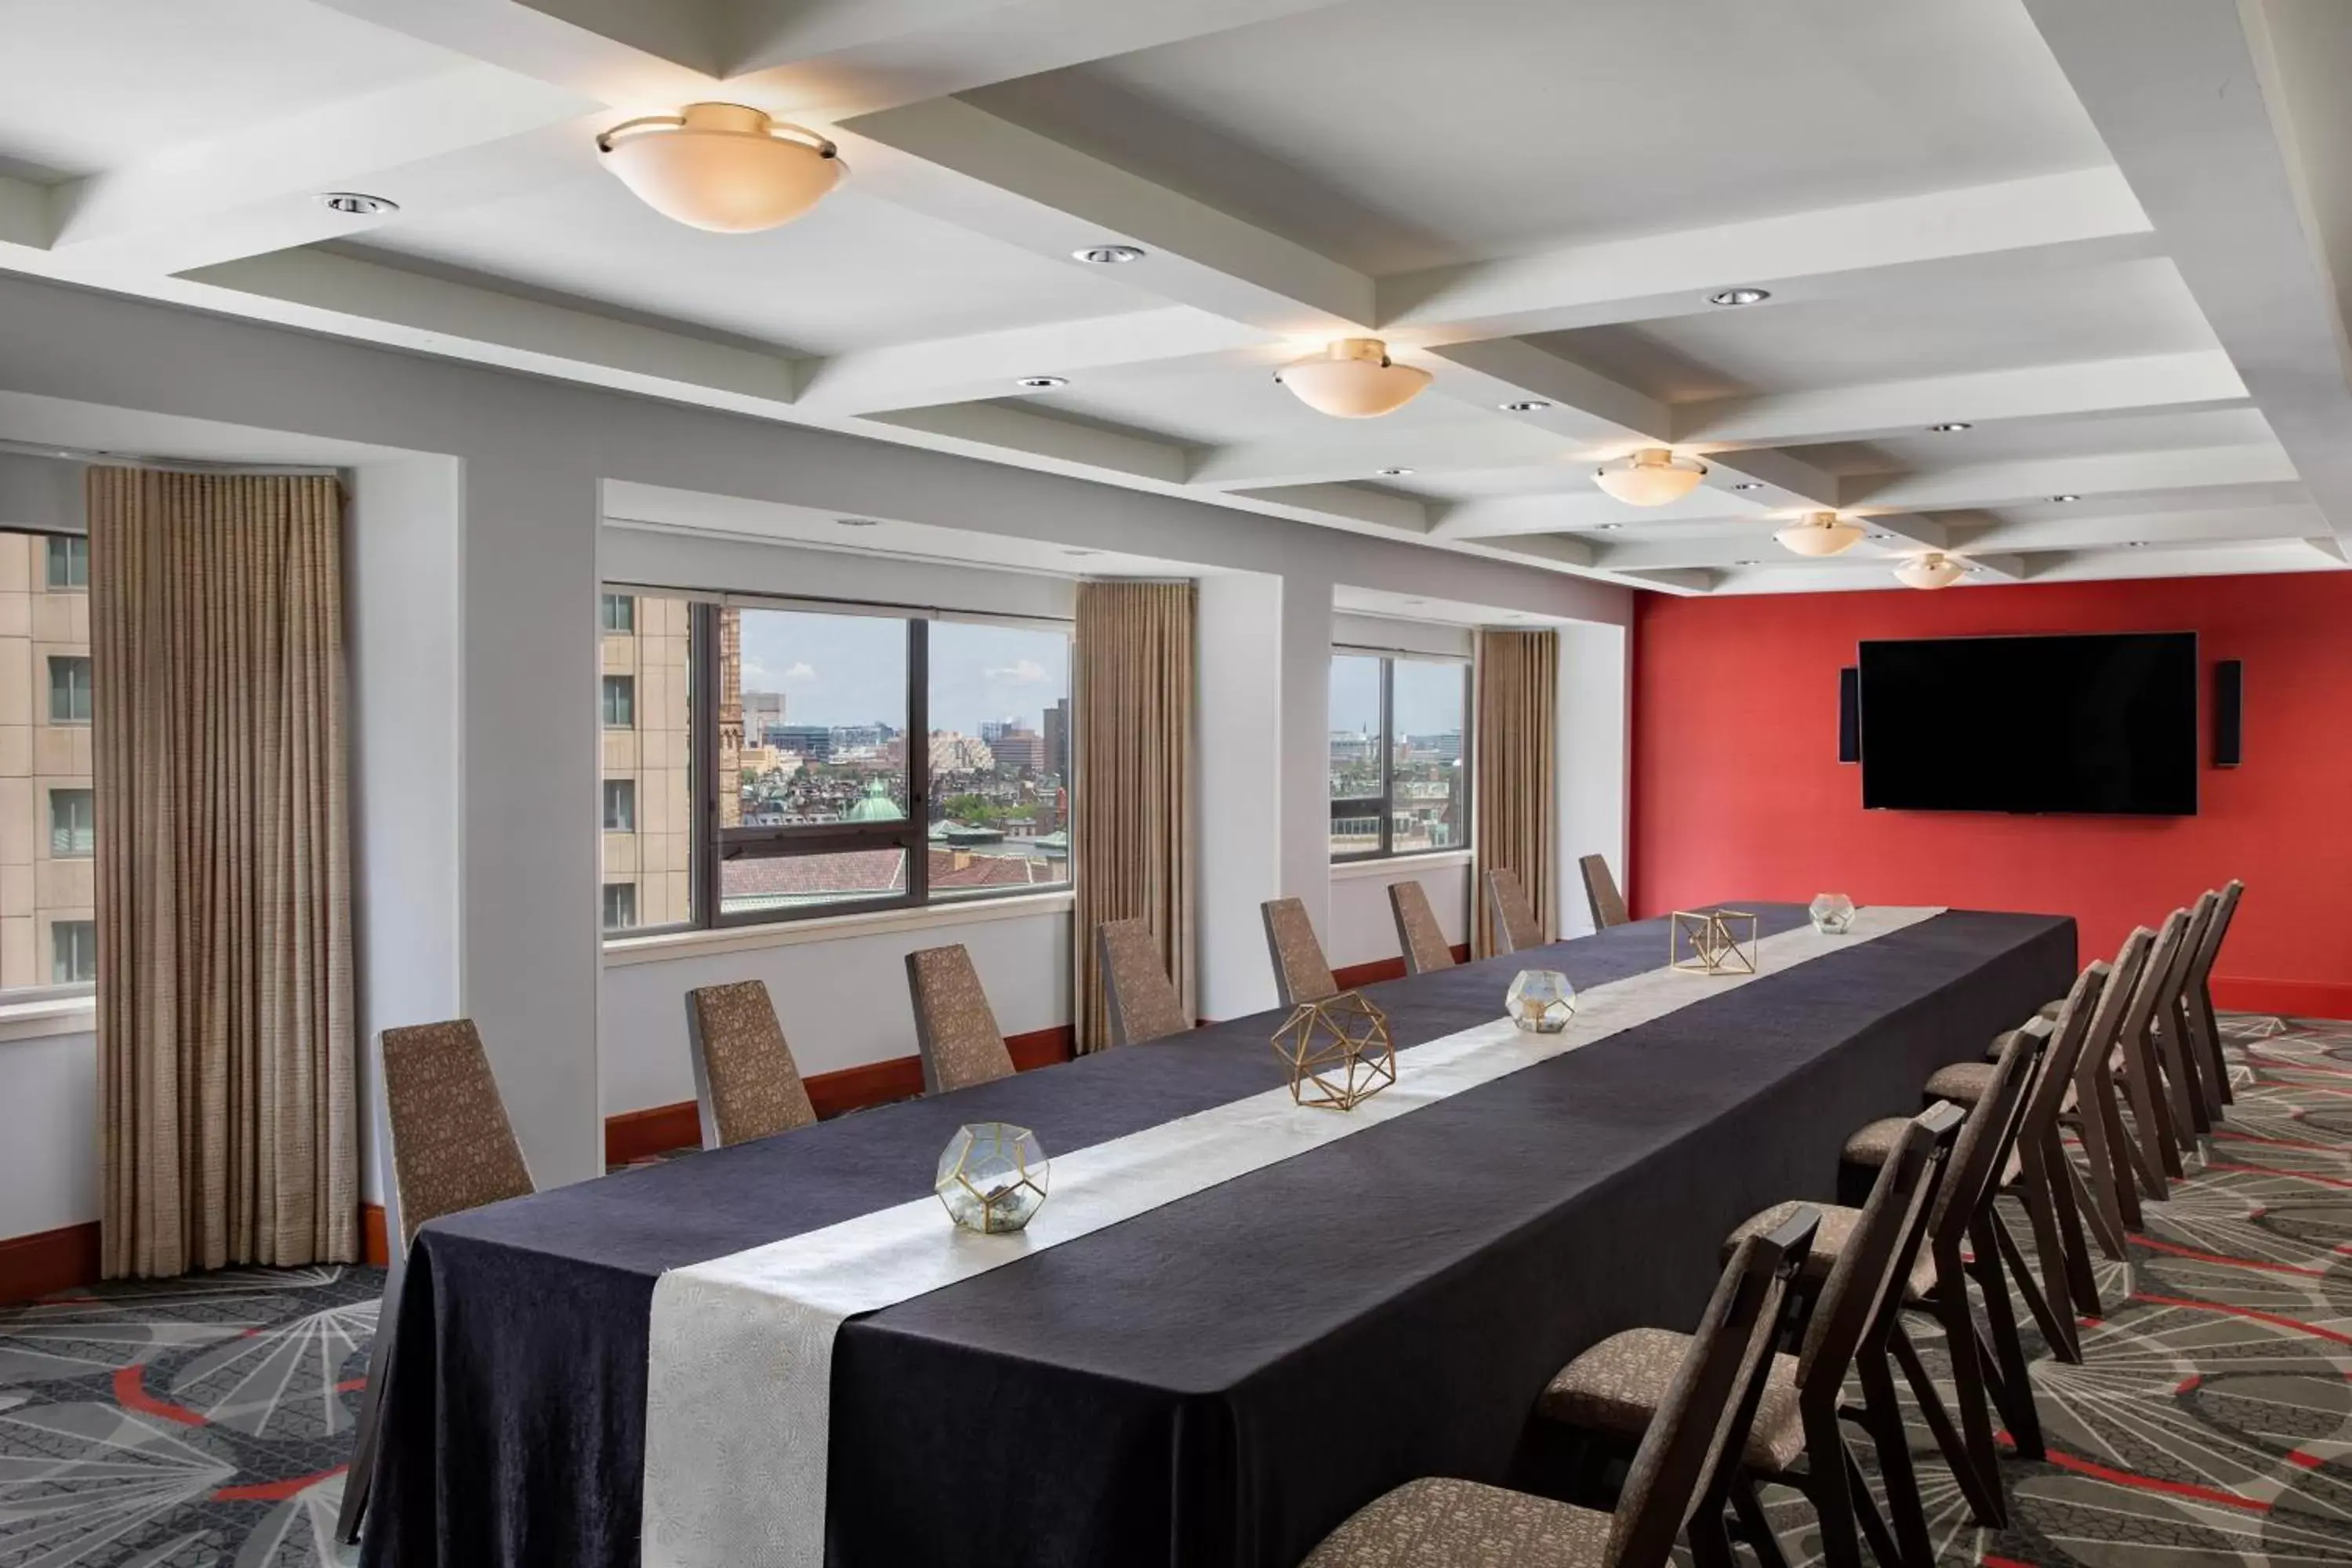 Meeting/conference room in The Westin Copley Place, Boston